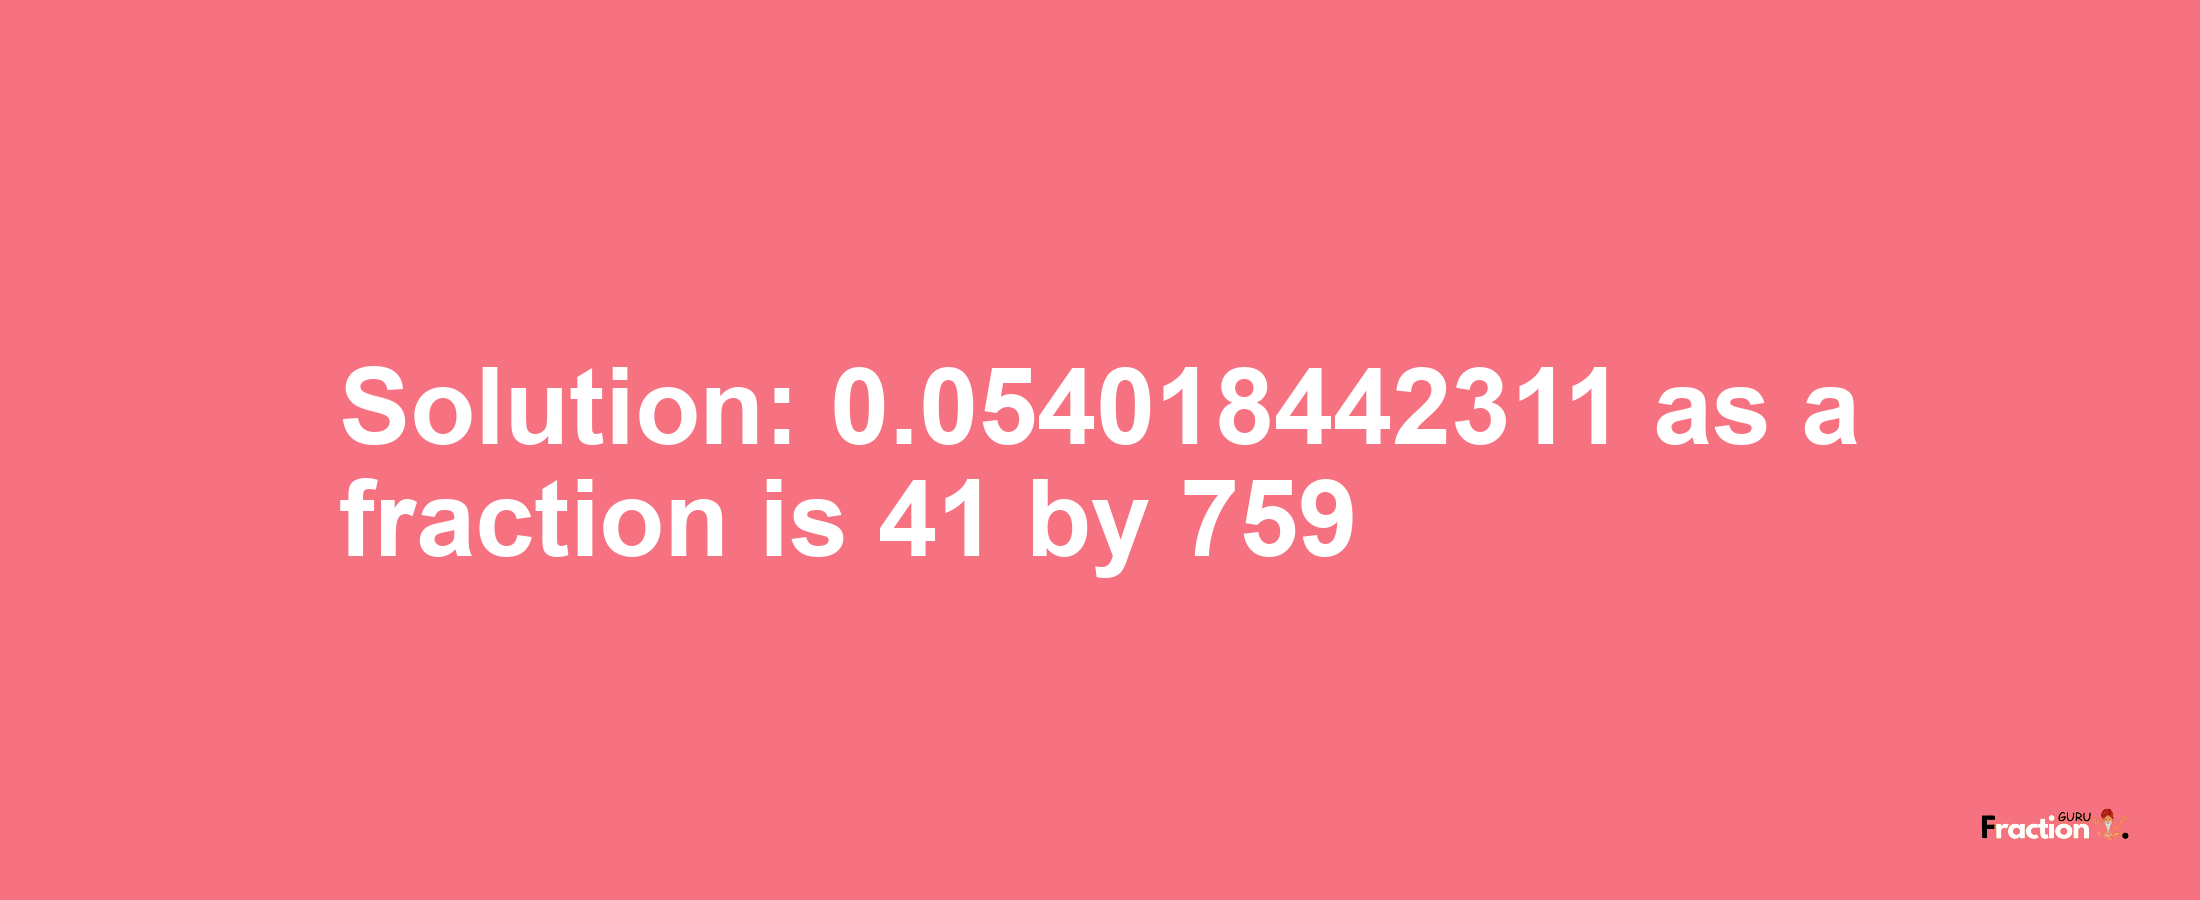 Solution:0.054018442311 as a fraction is 41/759